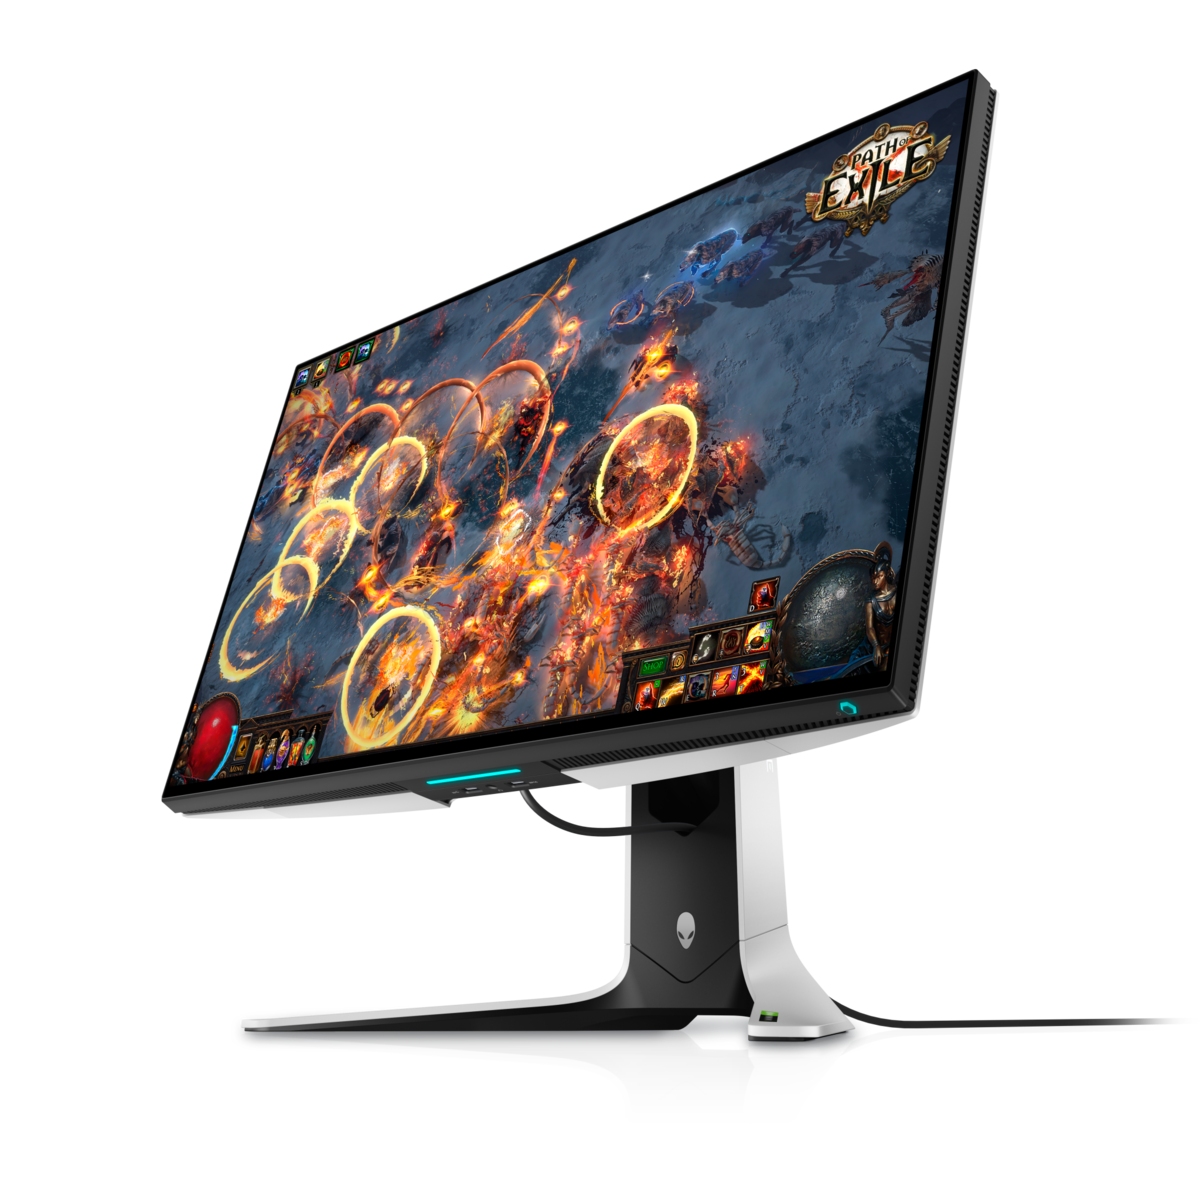 Alienware introduces 25-in 360 Hz monitor with AMD FreeSync and NVIDIA  G-Sync: 1080p IPS panel with 99 percent sRGB competes with ASUS ROG Swift  360 for the Fortnite and Overwatch eSports crowd 